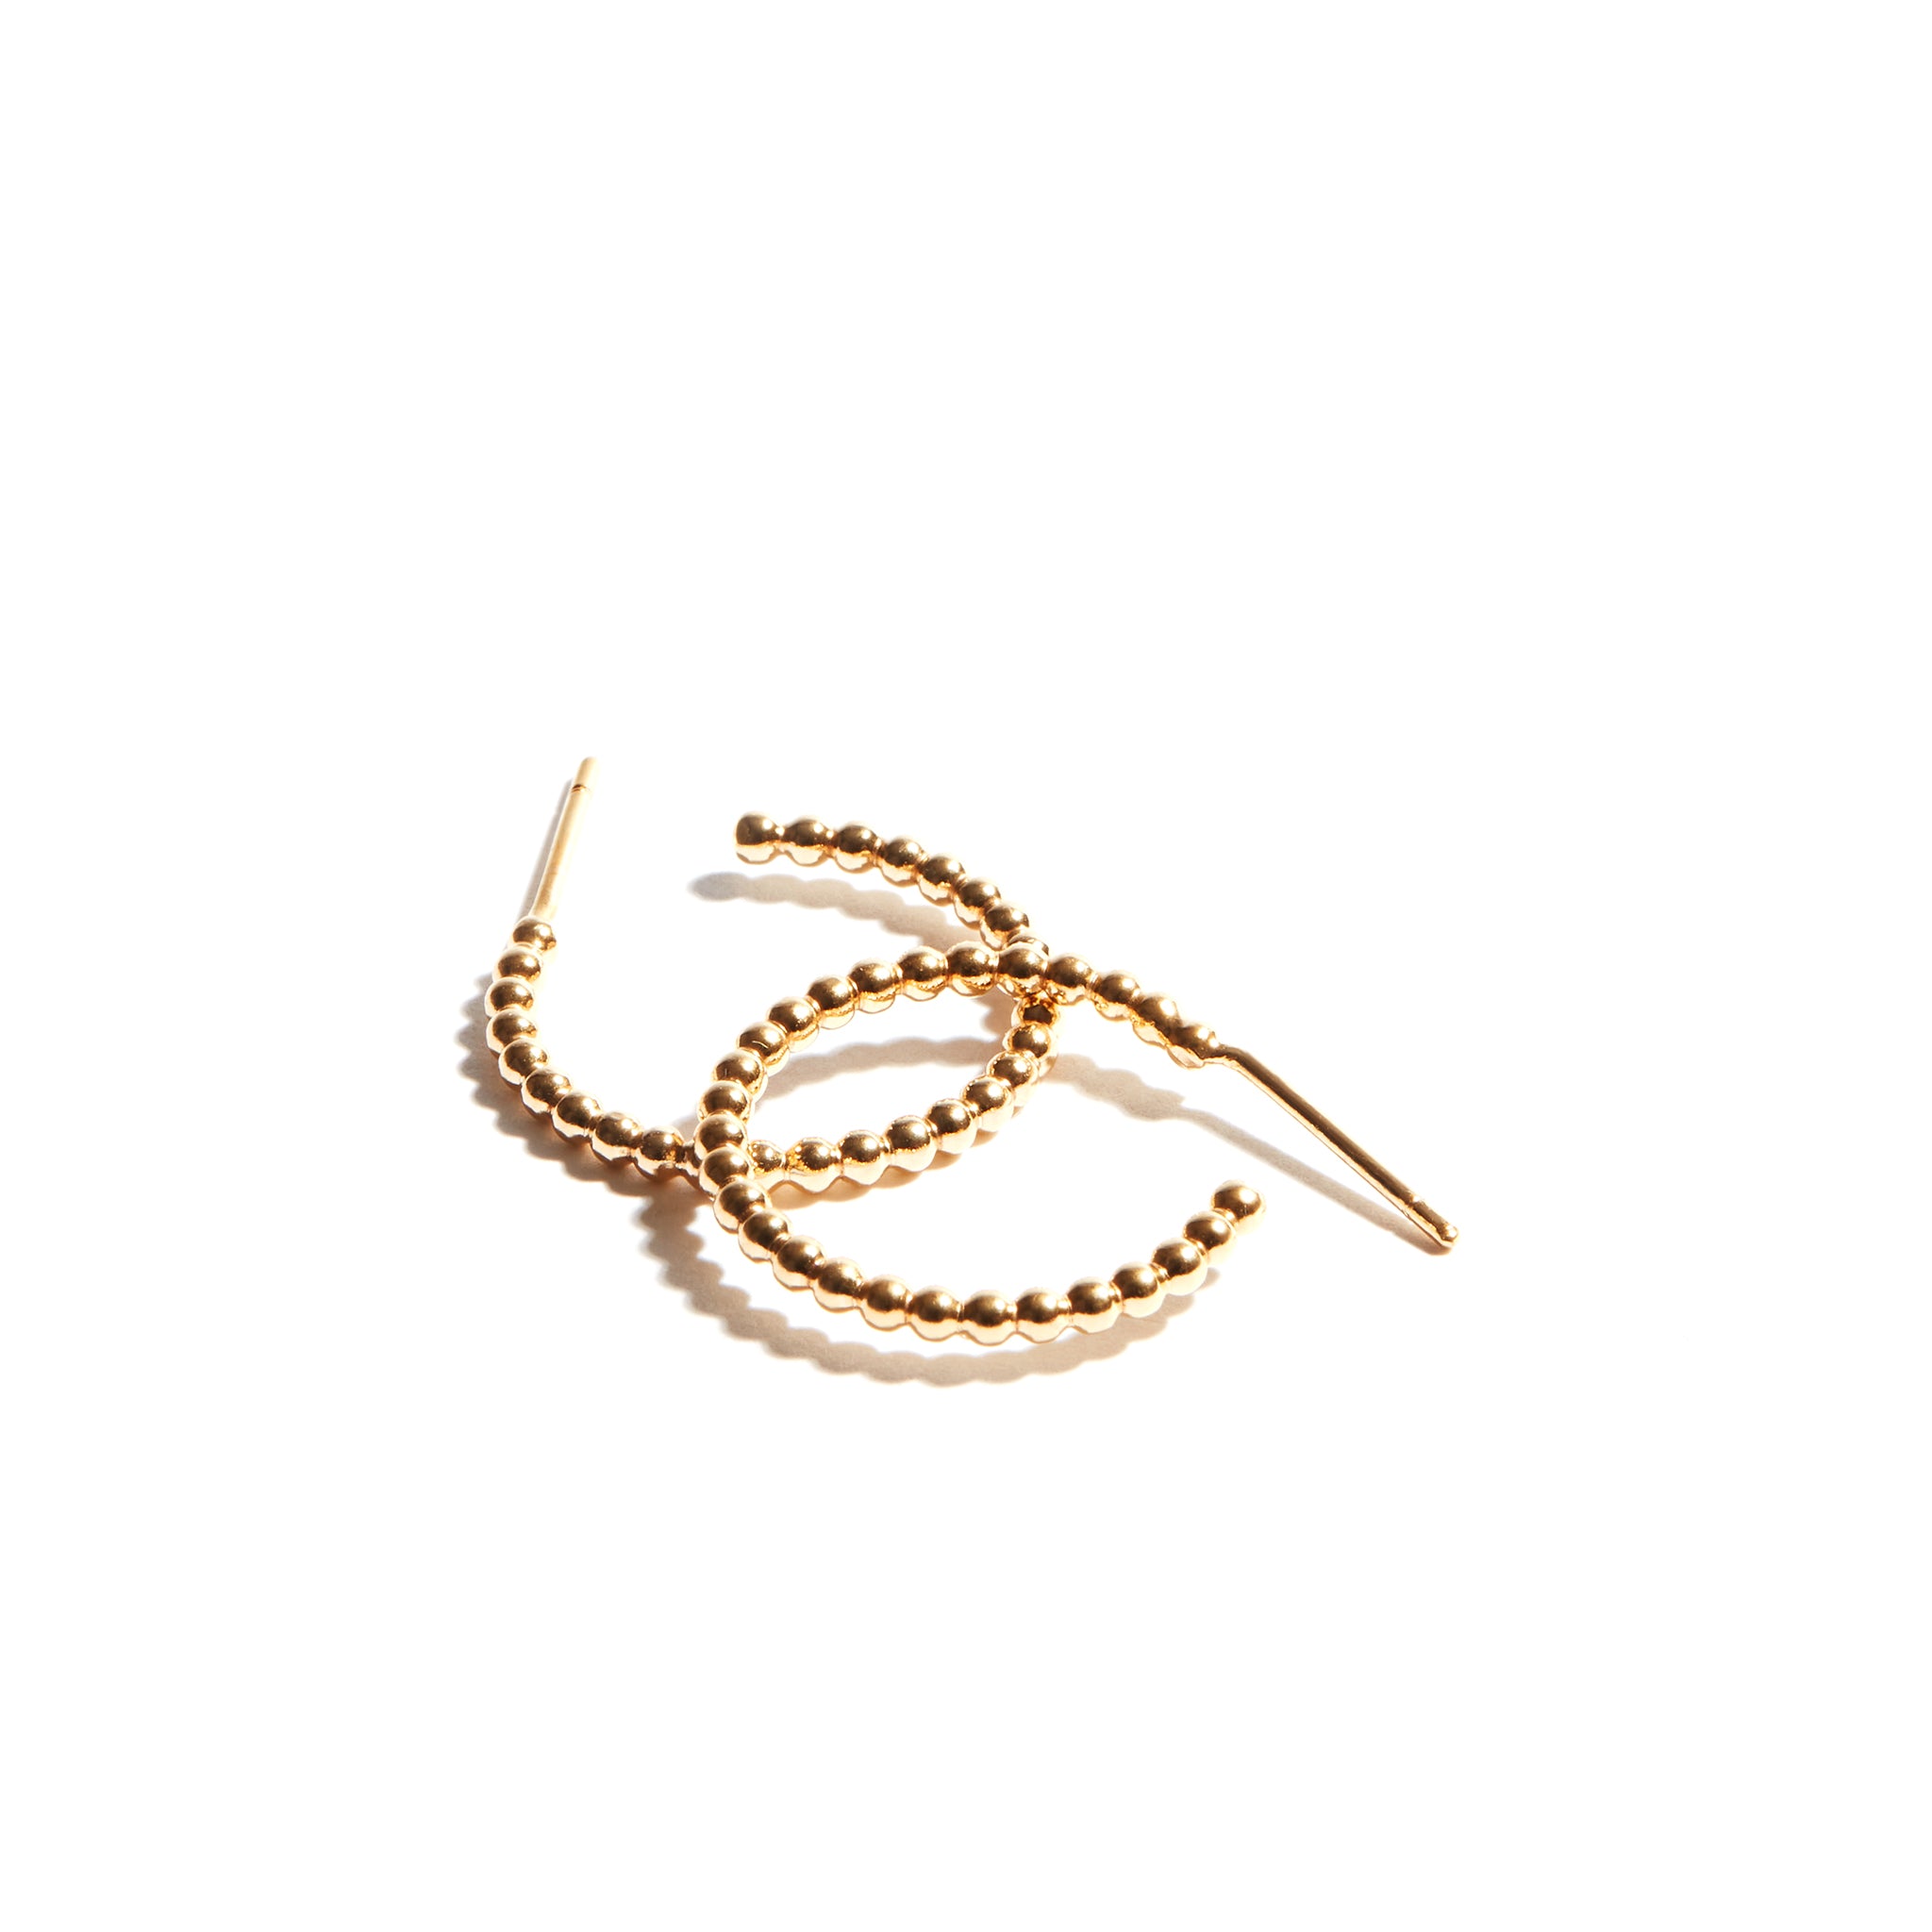 Stylish Medium Bubble Hoop Earrings made from 14ct gold fill, featuring a textured design with small bubbles, perfect for adding a touch of charm to any outfit.